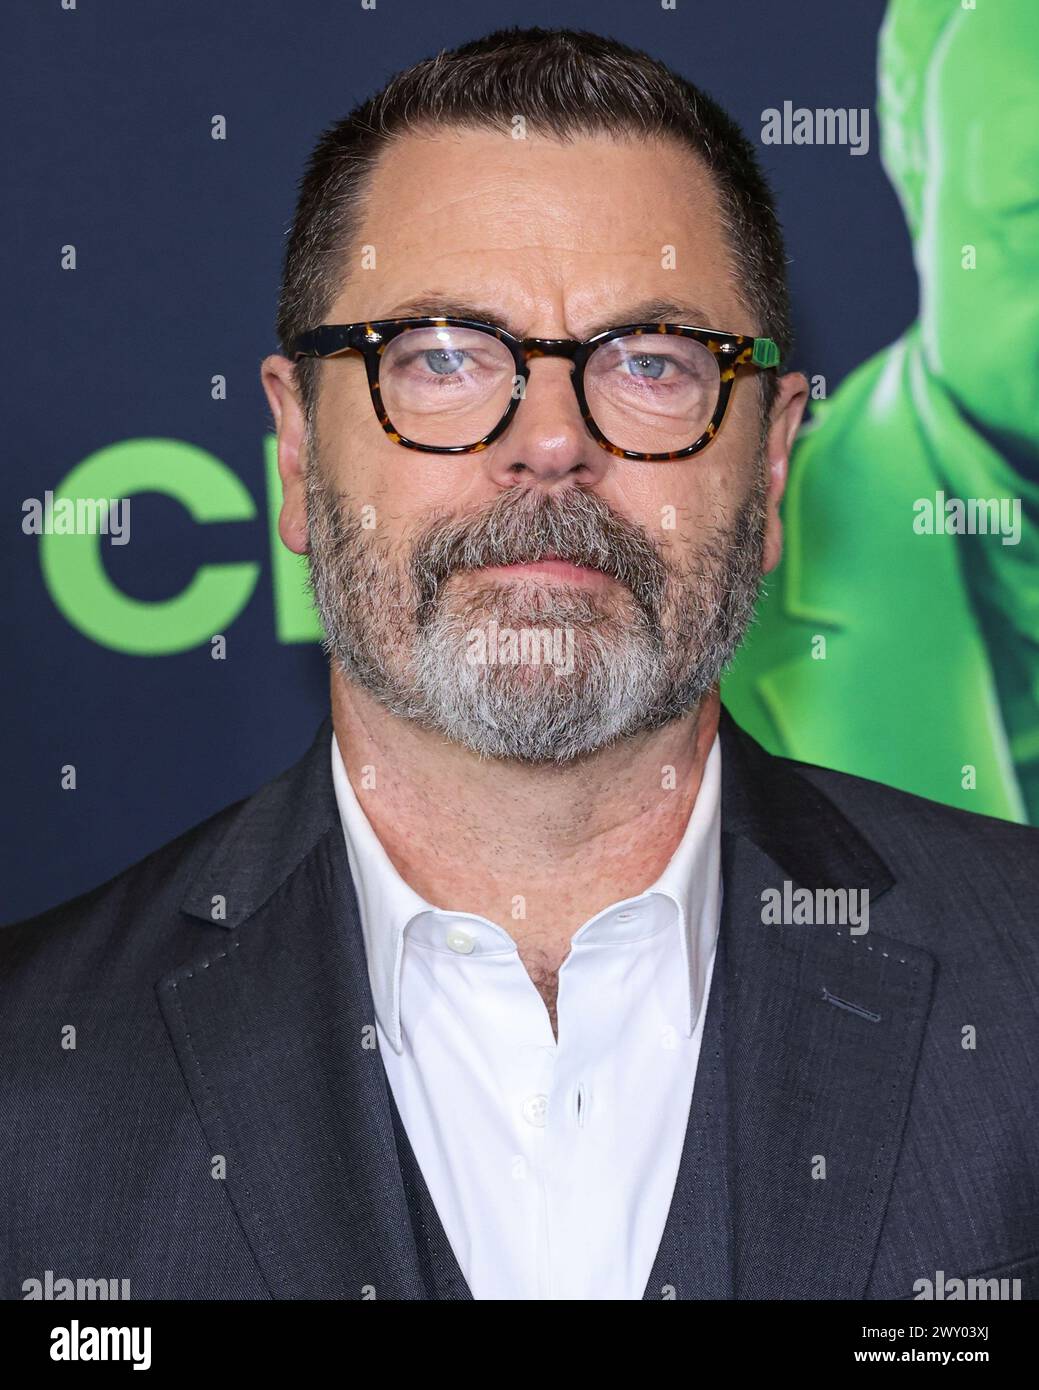 LOS ANGELES, CALIFORNIA, USA - APRIL 02: Nick Offerman arrives at the Los Angeles Special Screening Of A24's 'Civil War' held at the Academy Museum of Motion Pictures on April 2, 2024 in Los Angeles, California, United States. (Photo by Xavier Collin/Image Press Agency) Stock Photo